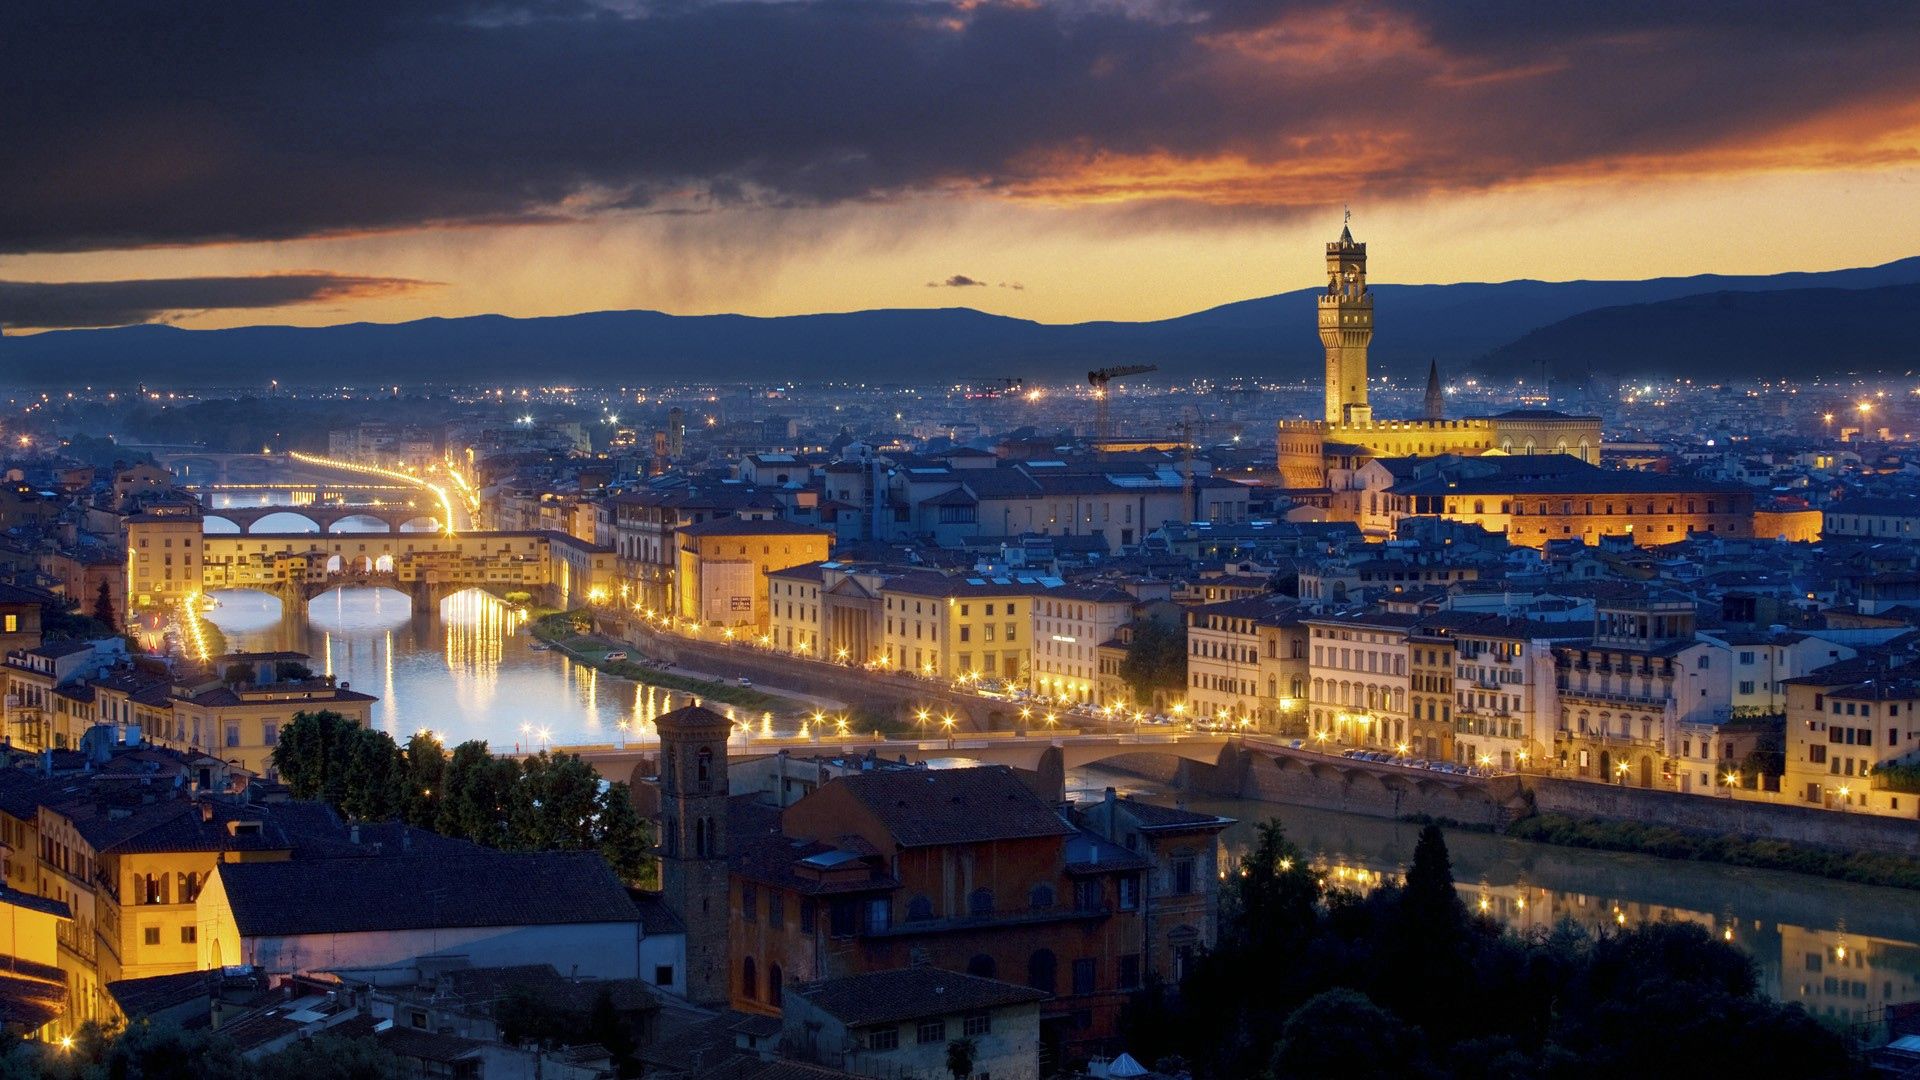 cities, rivers, italy, building, city lights, florence, ponte vecchio